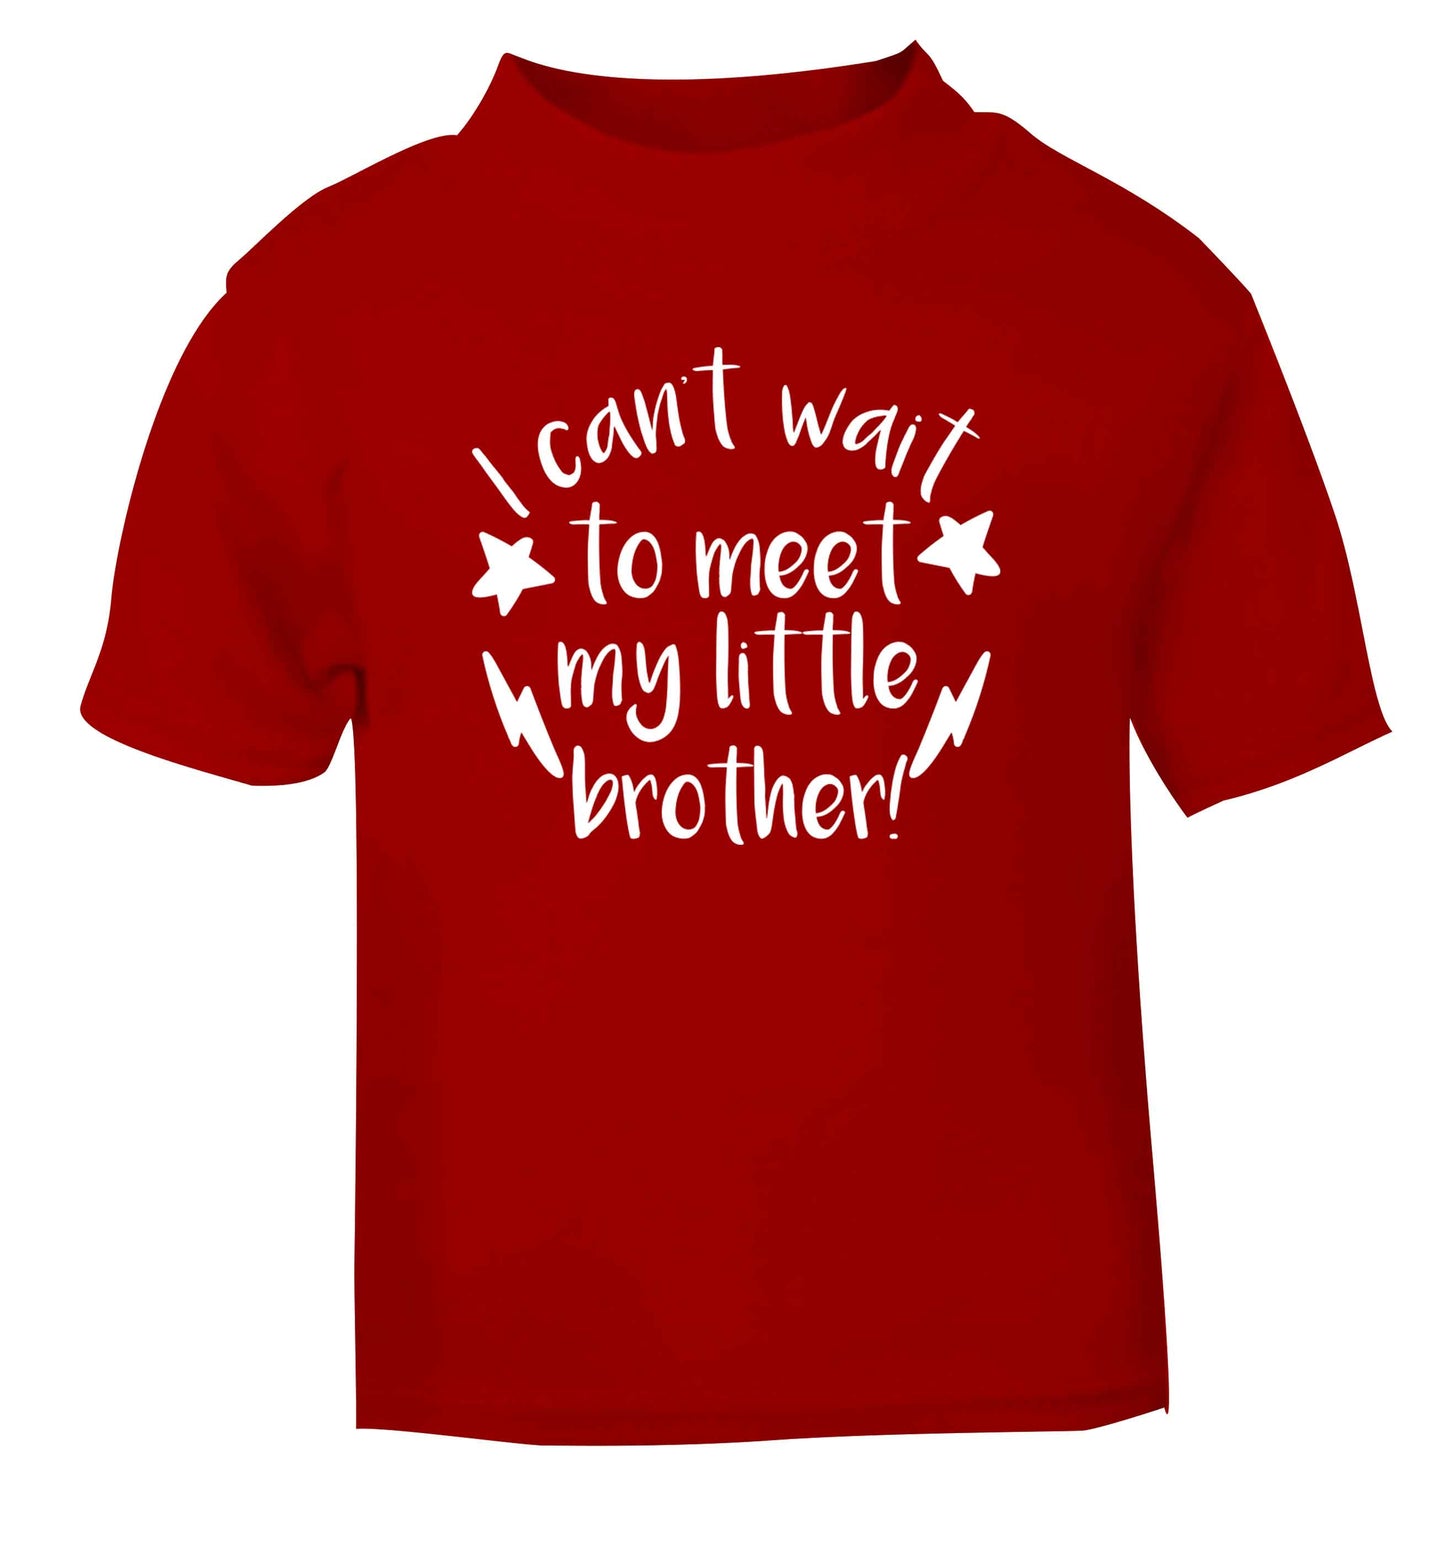 I can't wait to meet my sister! red Baby Toddler Tshirt 2 Years